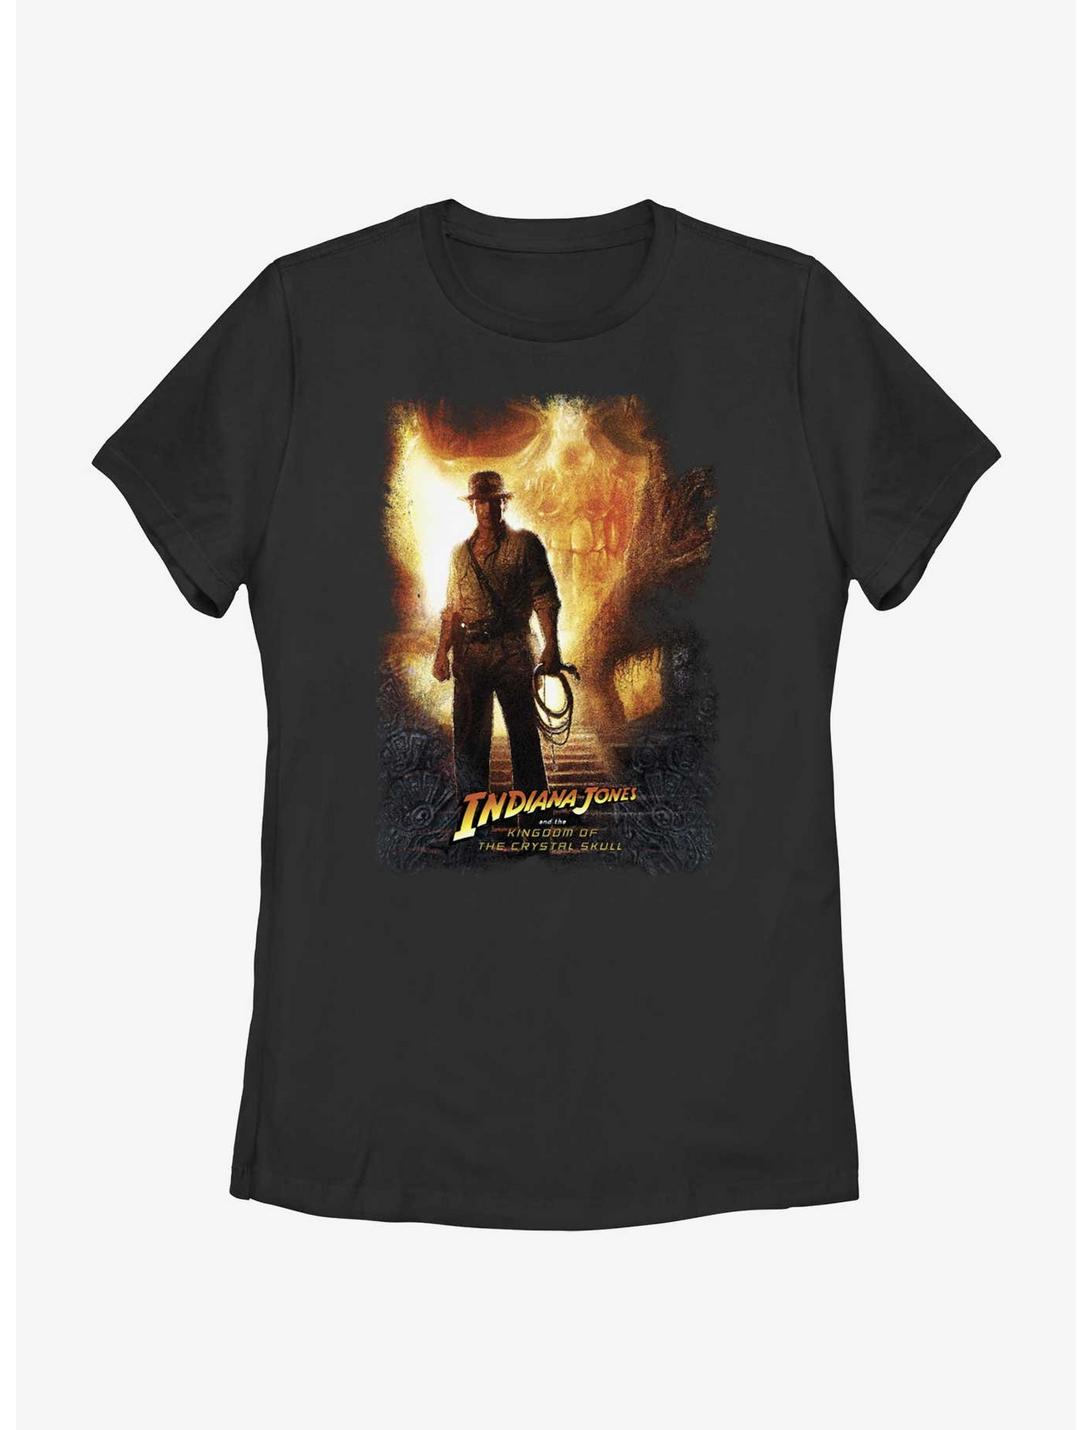 Indiana Jones and the Kingdom of the Crystal Skull Poster Womens T-Shirt, BLACK, hi-res